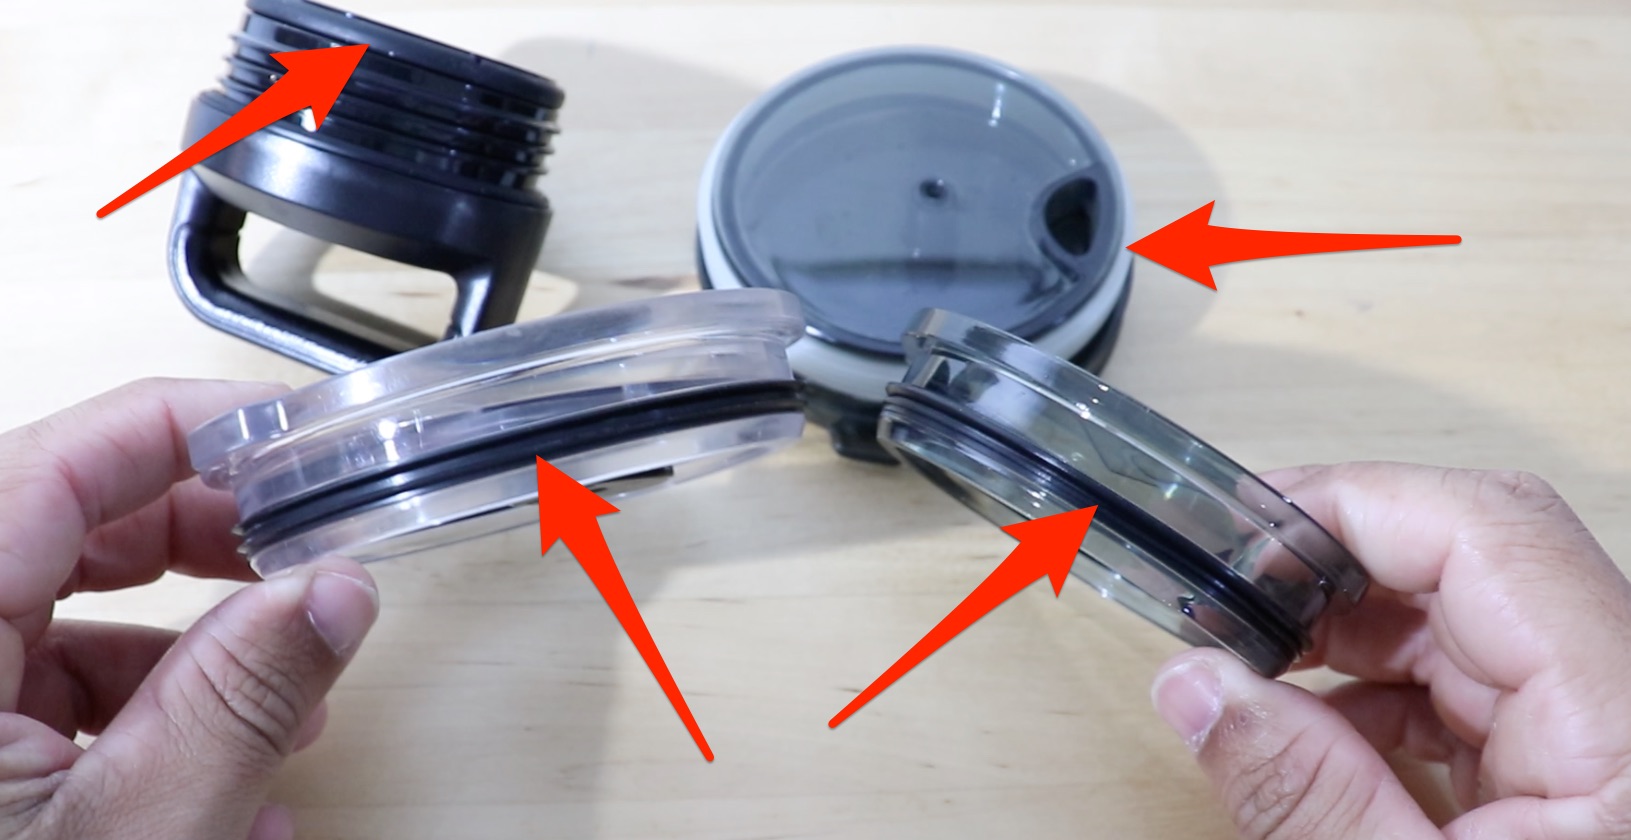 This Is Why You Need To Clean Your Stainless Steel Tumbler Lid